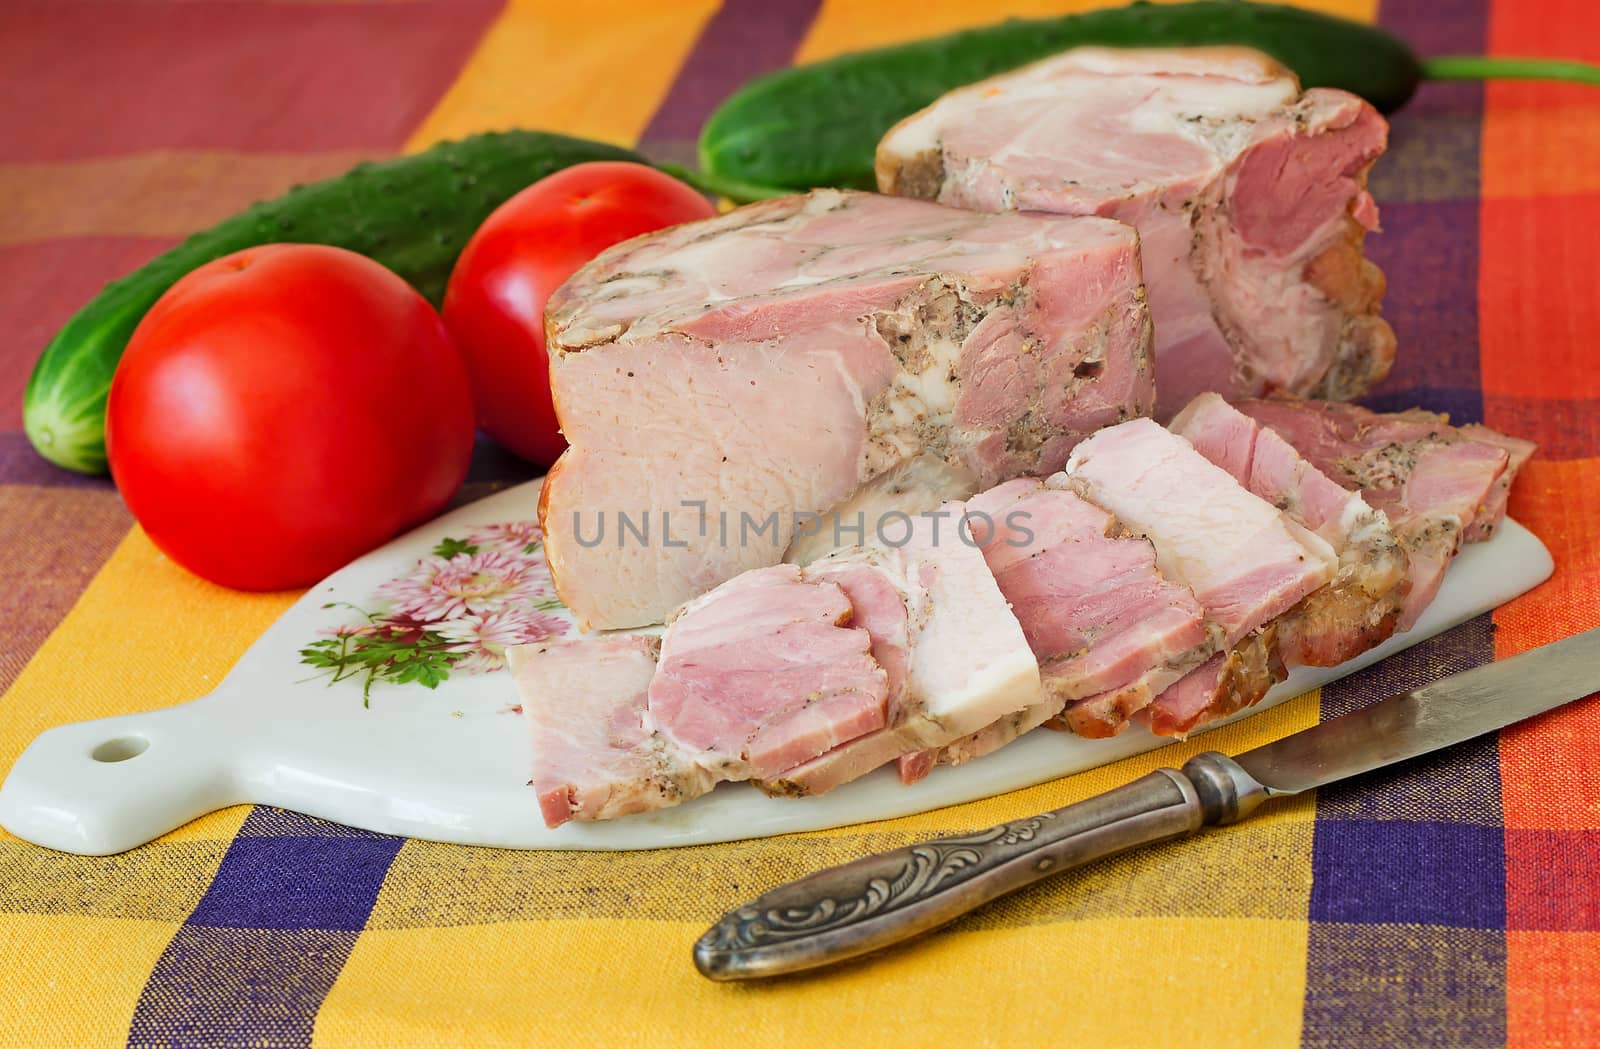 The big appetizing piece of smoked pork with vegetables is located on a table on a white plate.